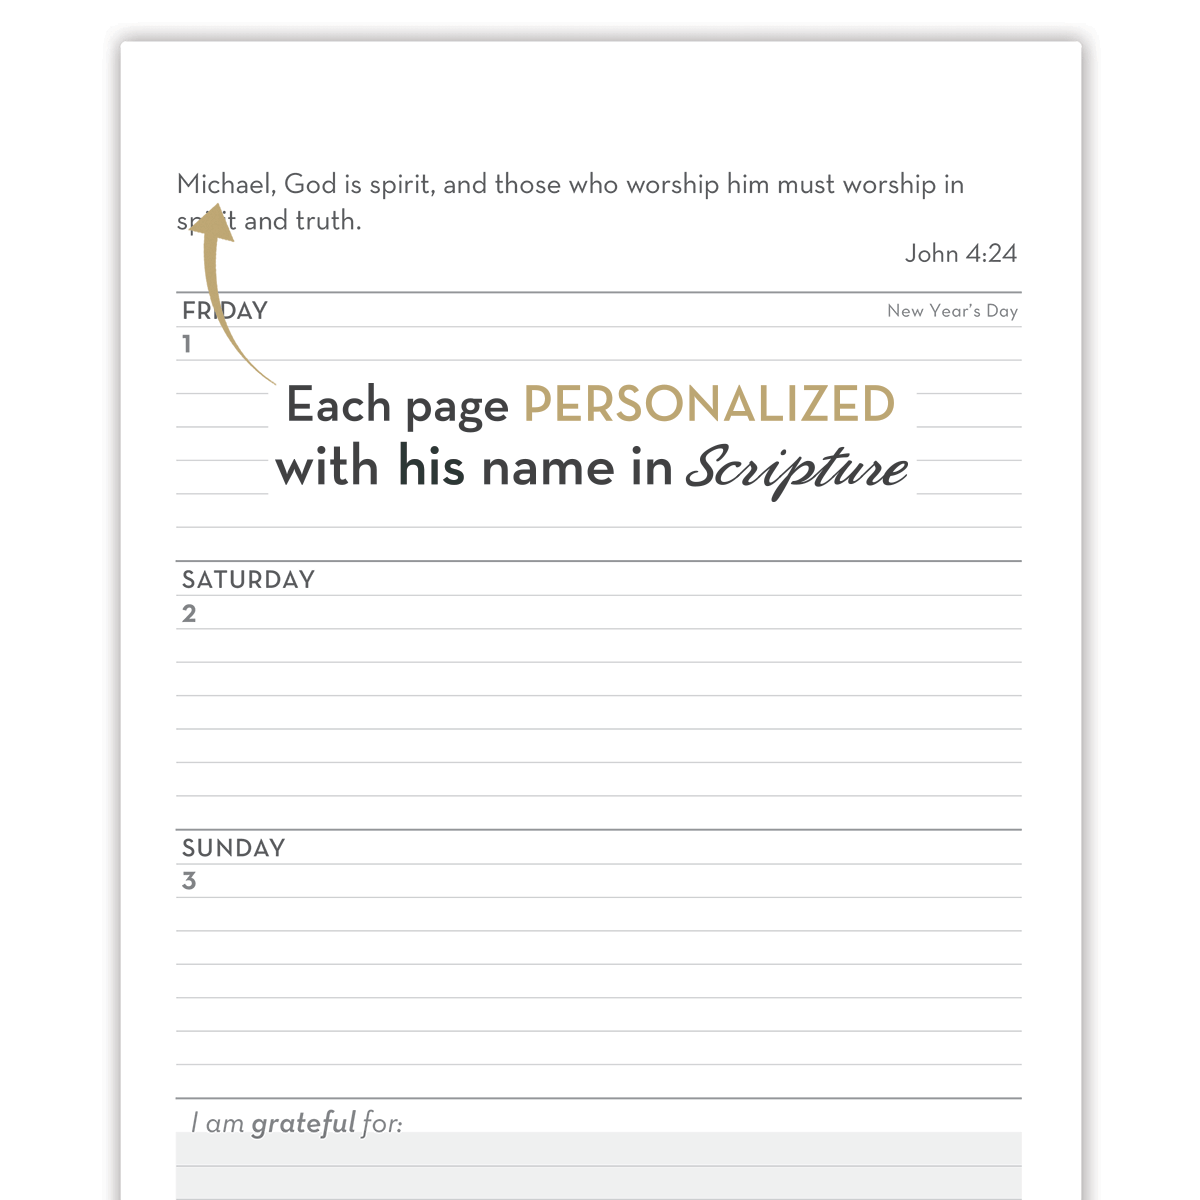 Personalized scripture planners make the perfect Christian Gift for men.  Christian Planner, Christian Gifts, Daily Devotional, Bible Verse planner, Bible Planner, Scripture Planner, Personalized Scripture, Personalized Bible, Baptism Gifts, Christian wedding gifts, devotional, christian journal, bible journal